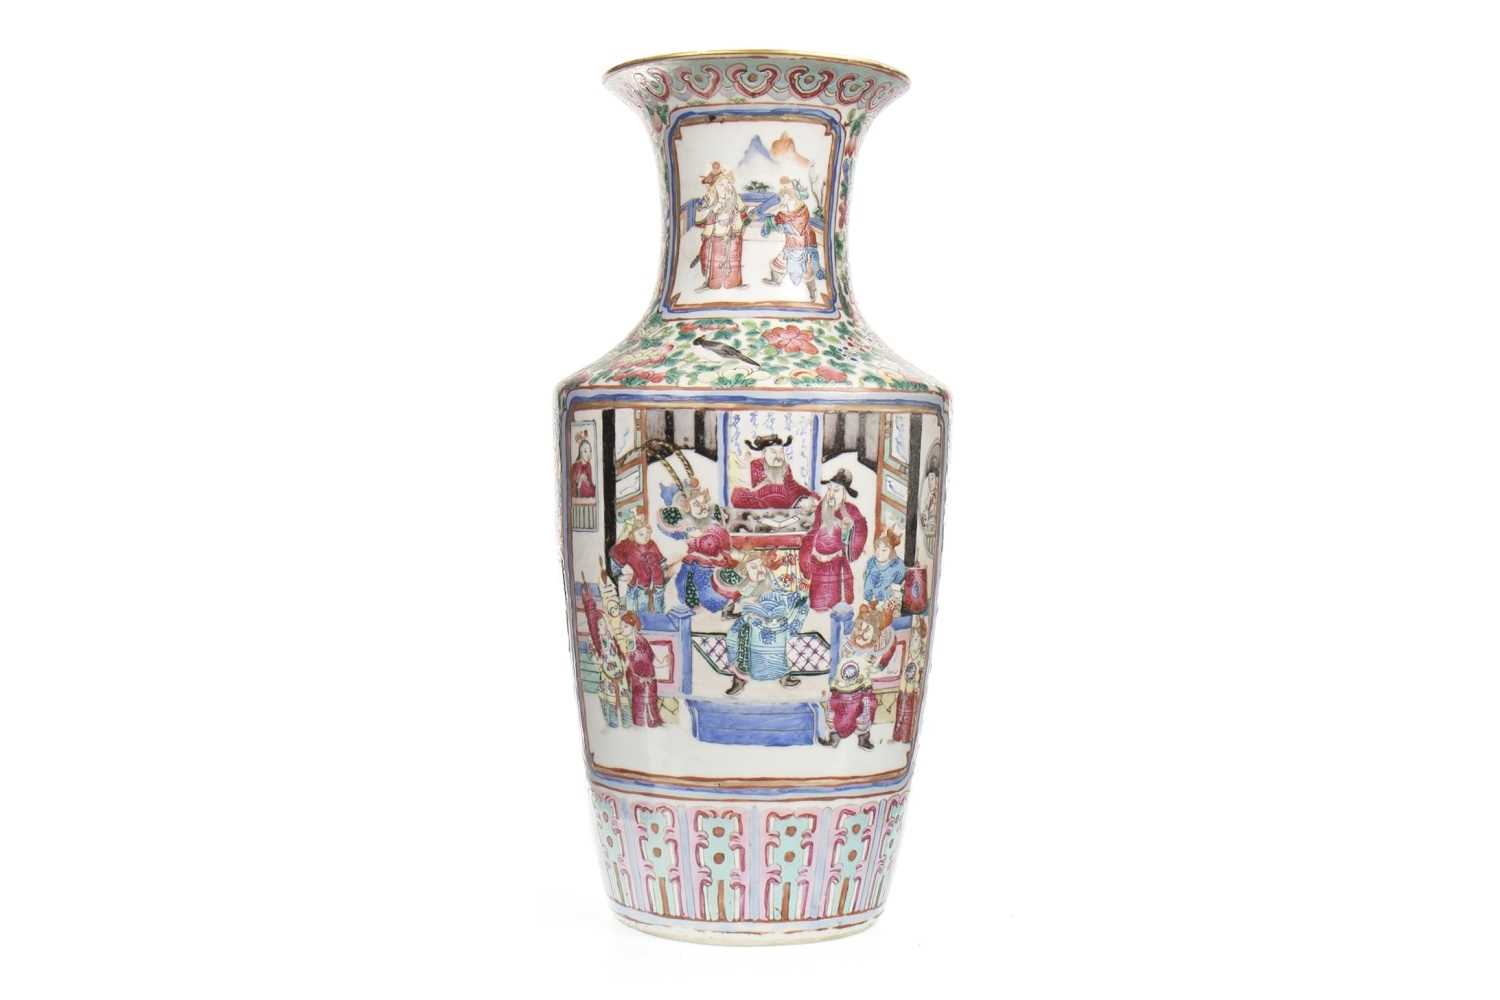 Lot 1097 - A CHINESE QING DYNASTY FAMILLE ROSE VASE